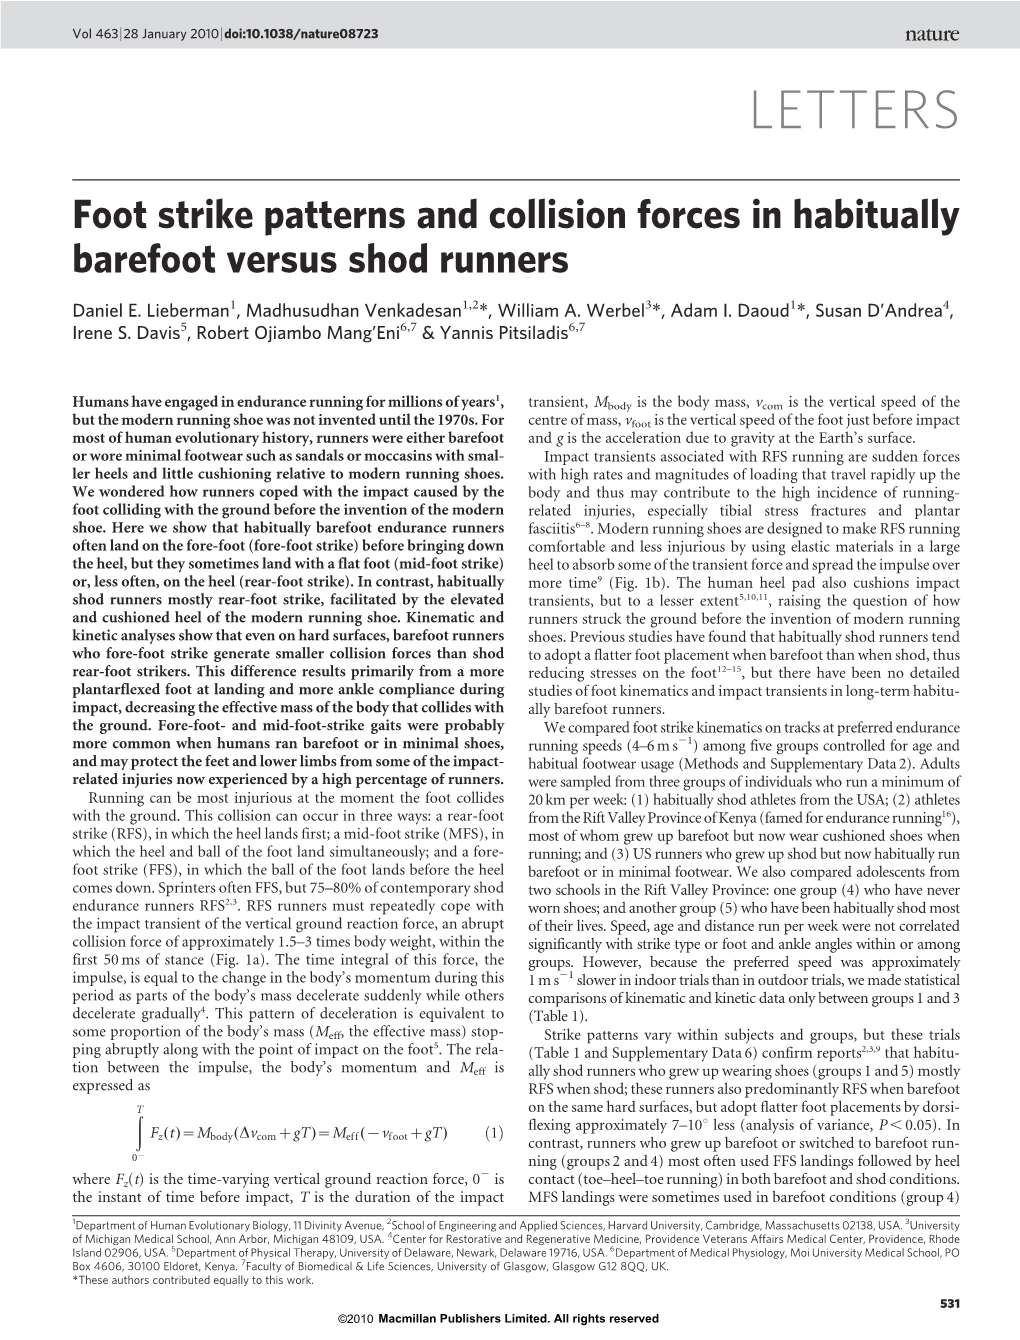 Foot Strike Patterns and Collision Forces in Habitually Barefoot Versus Shod Runners